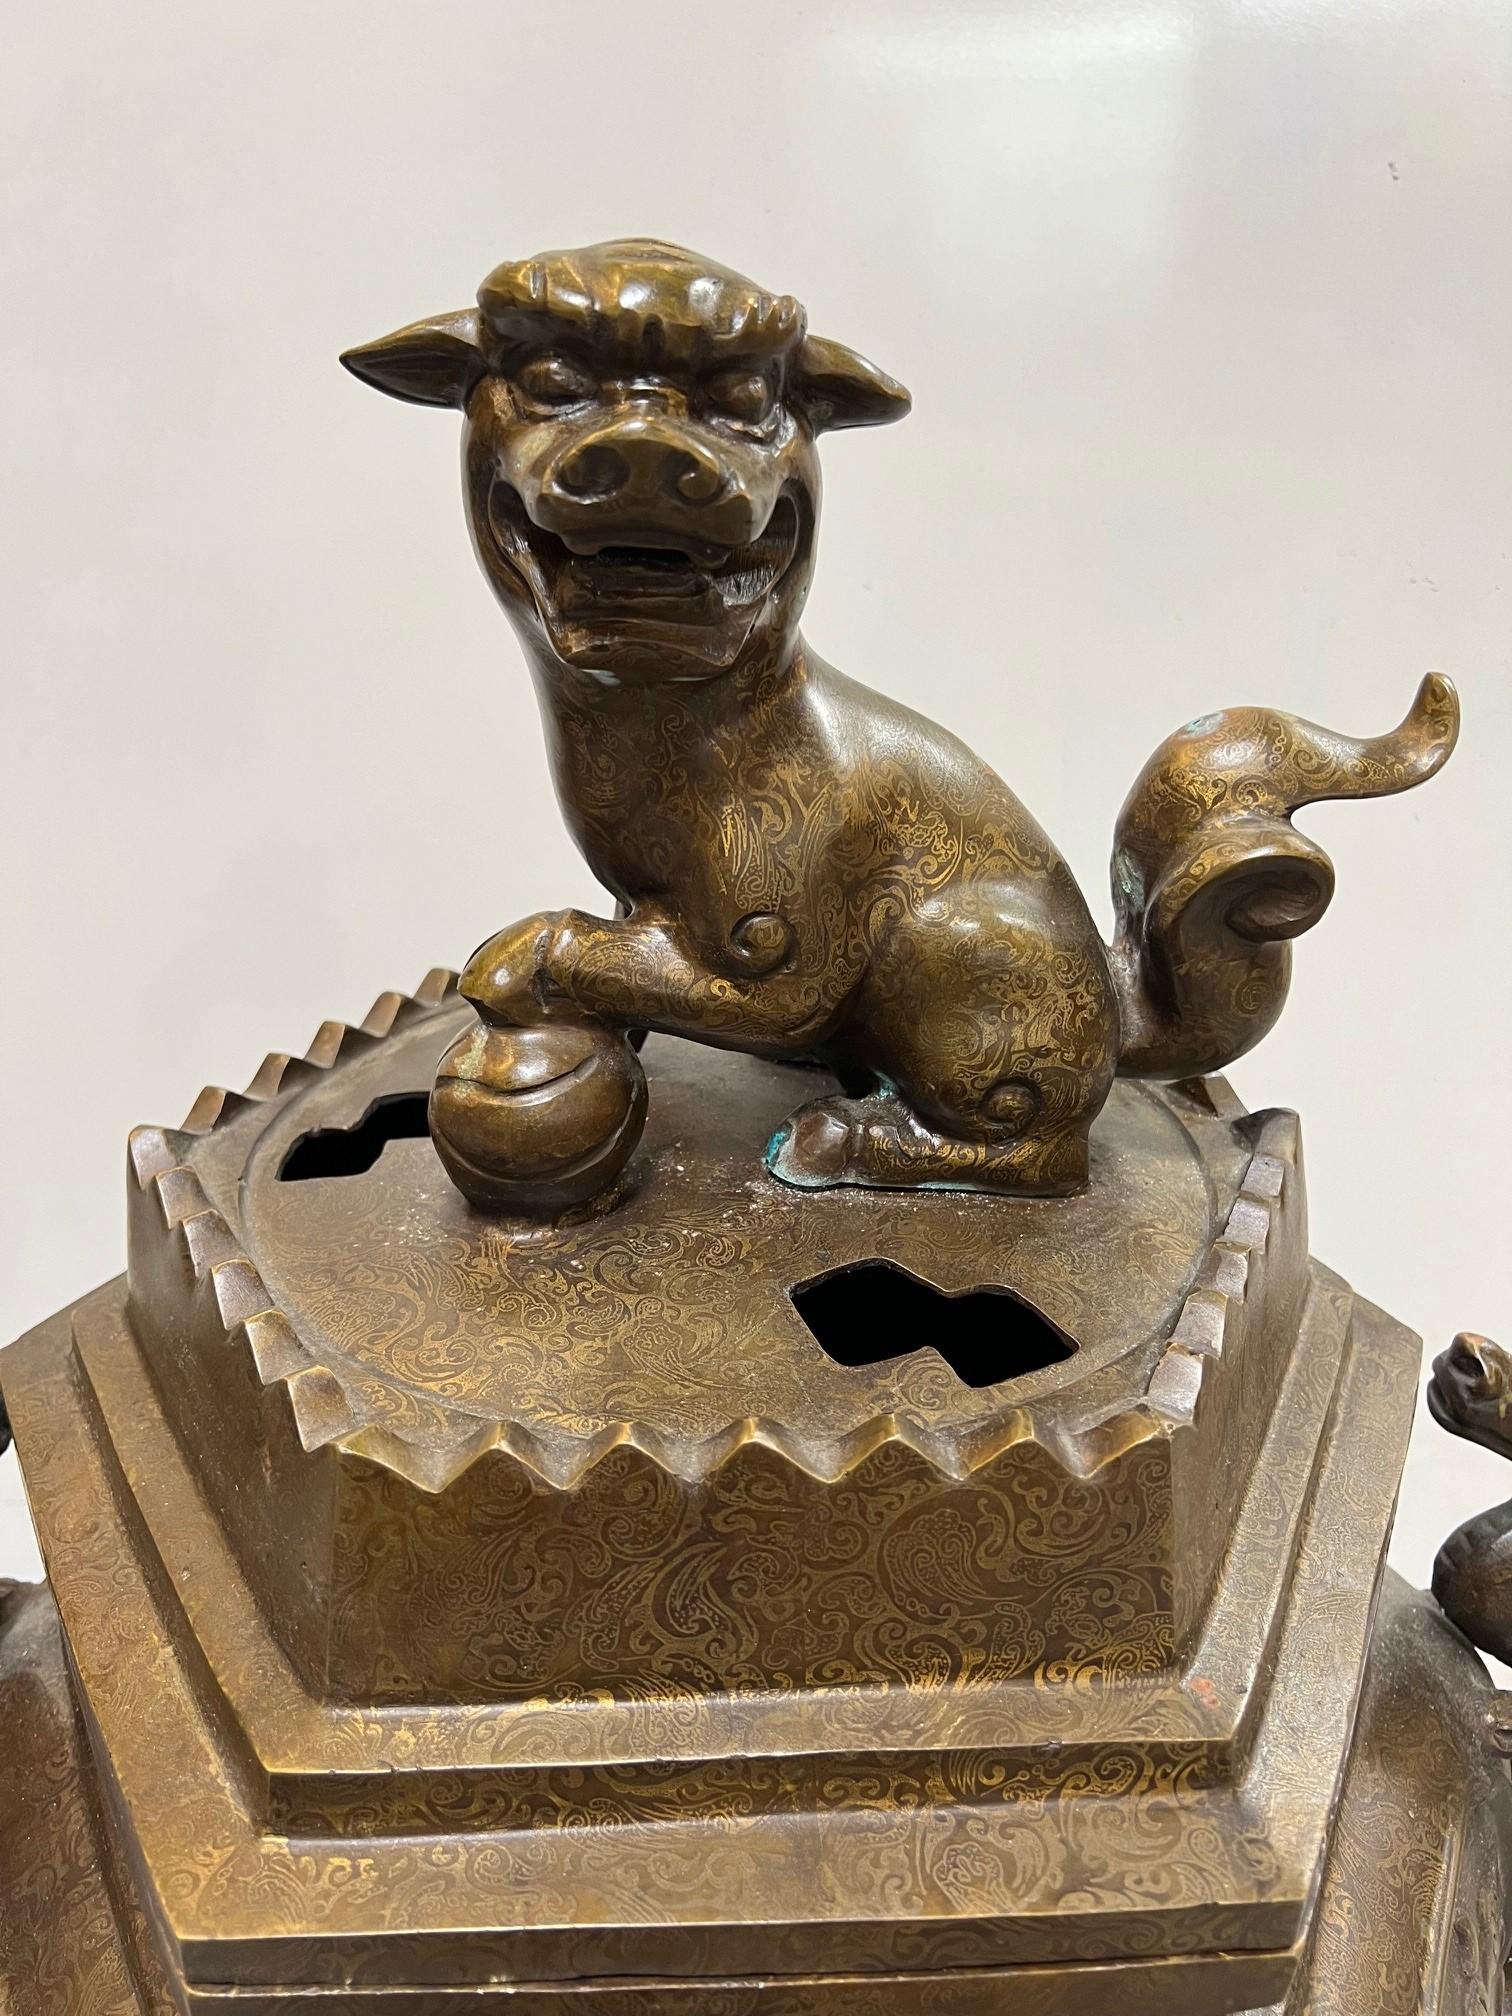 Early 20th Century large bronze censer on three legs with a foo dog sitting on top and Chinese dragons on each side. Censers also known as incense burners, have a long history in China, dating back to ancient times. They were used for a variety of